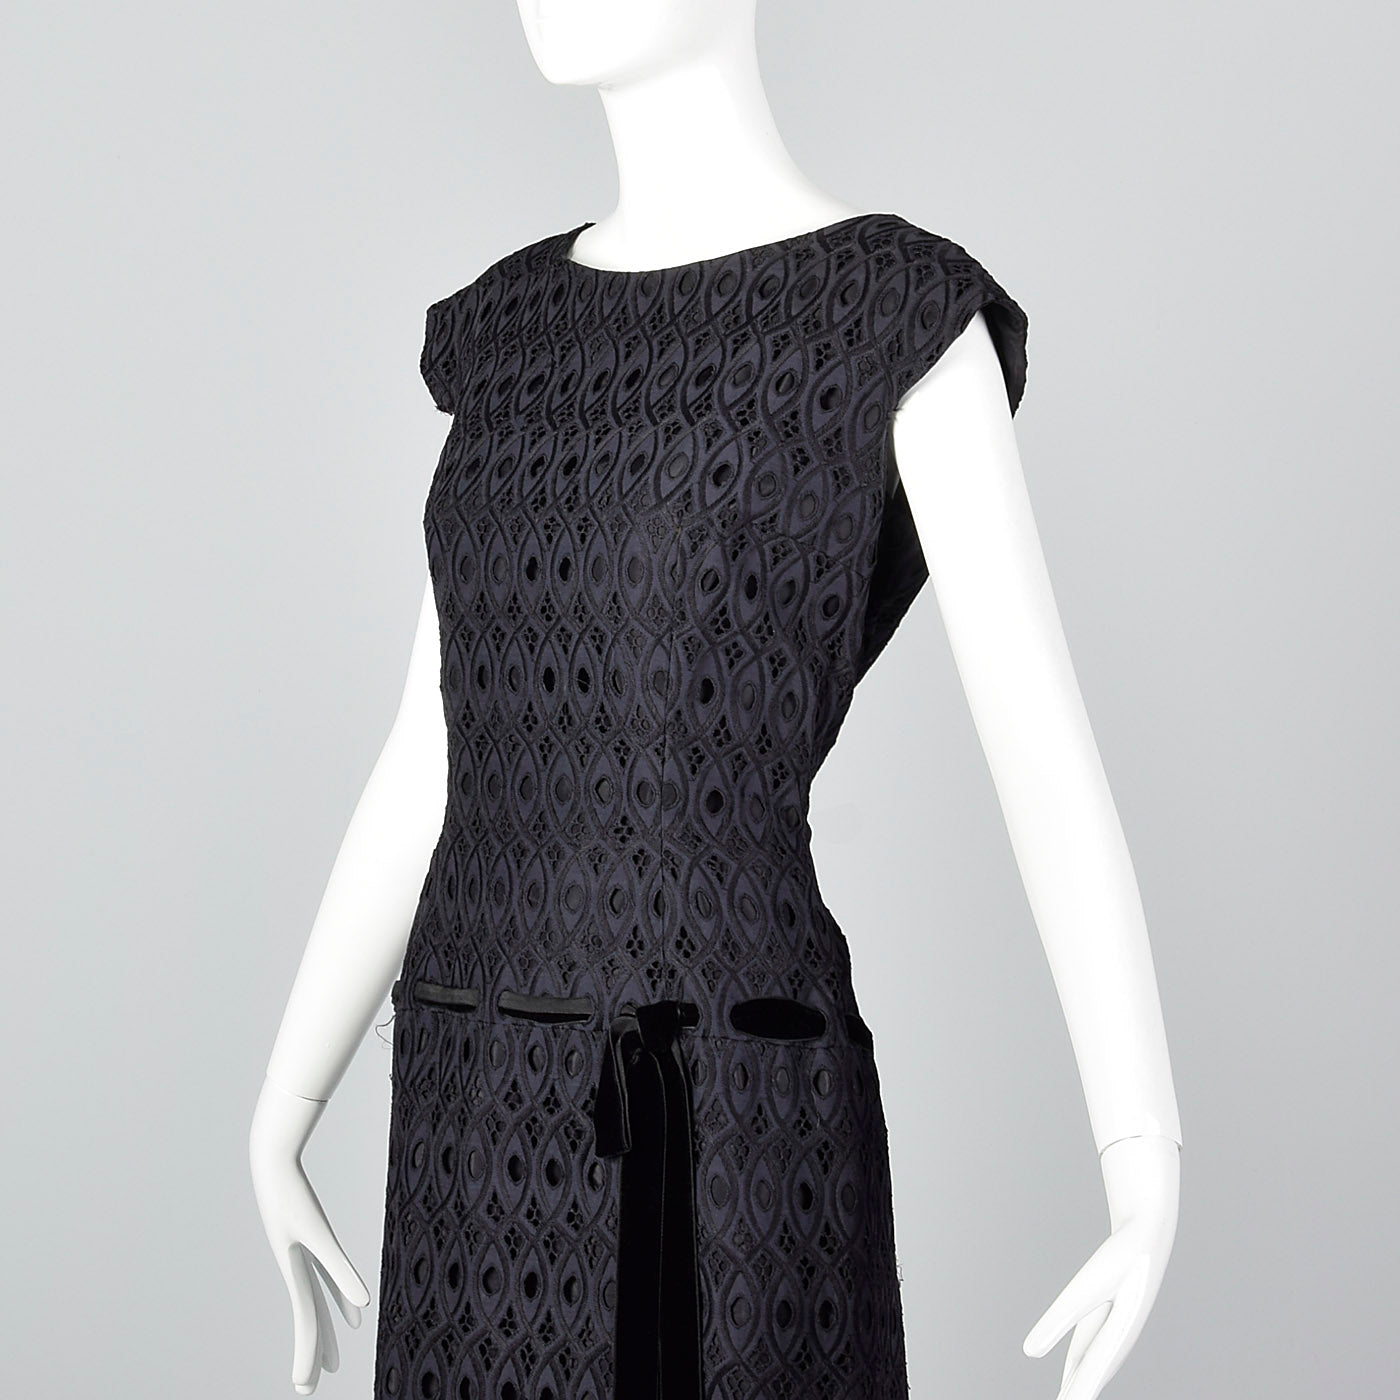 1950s Navy and Black Eyelet Dress with Drop Waist Illusion